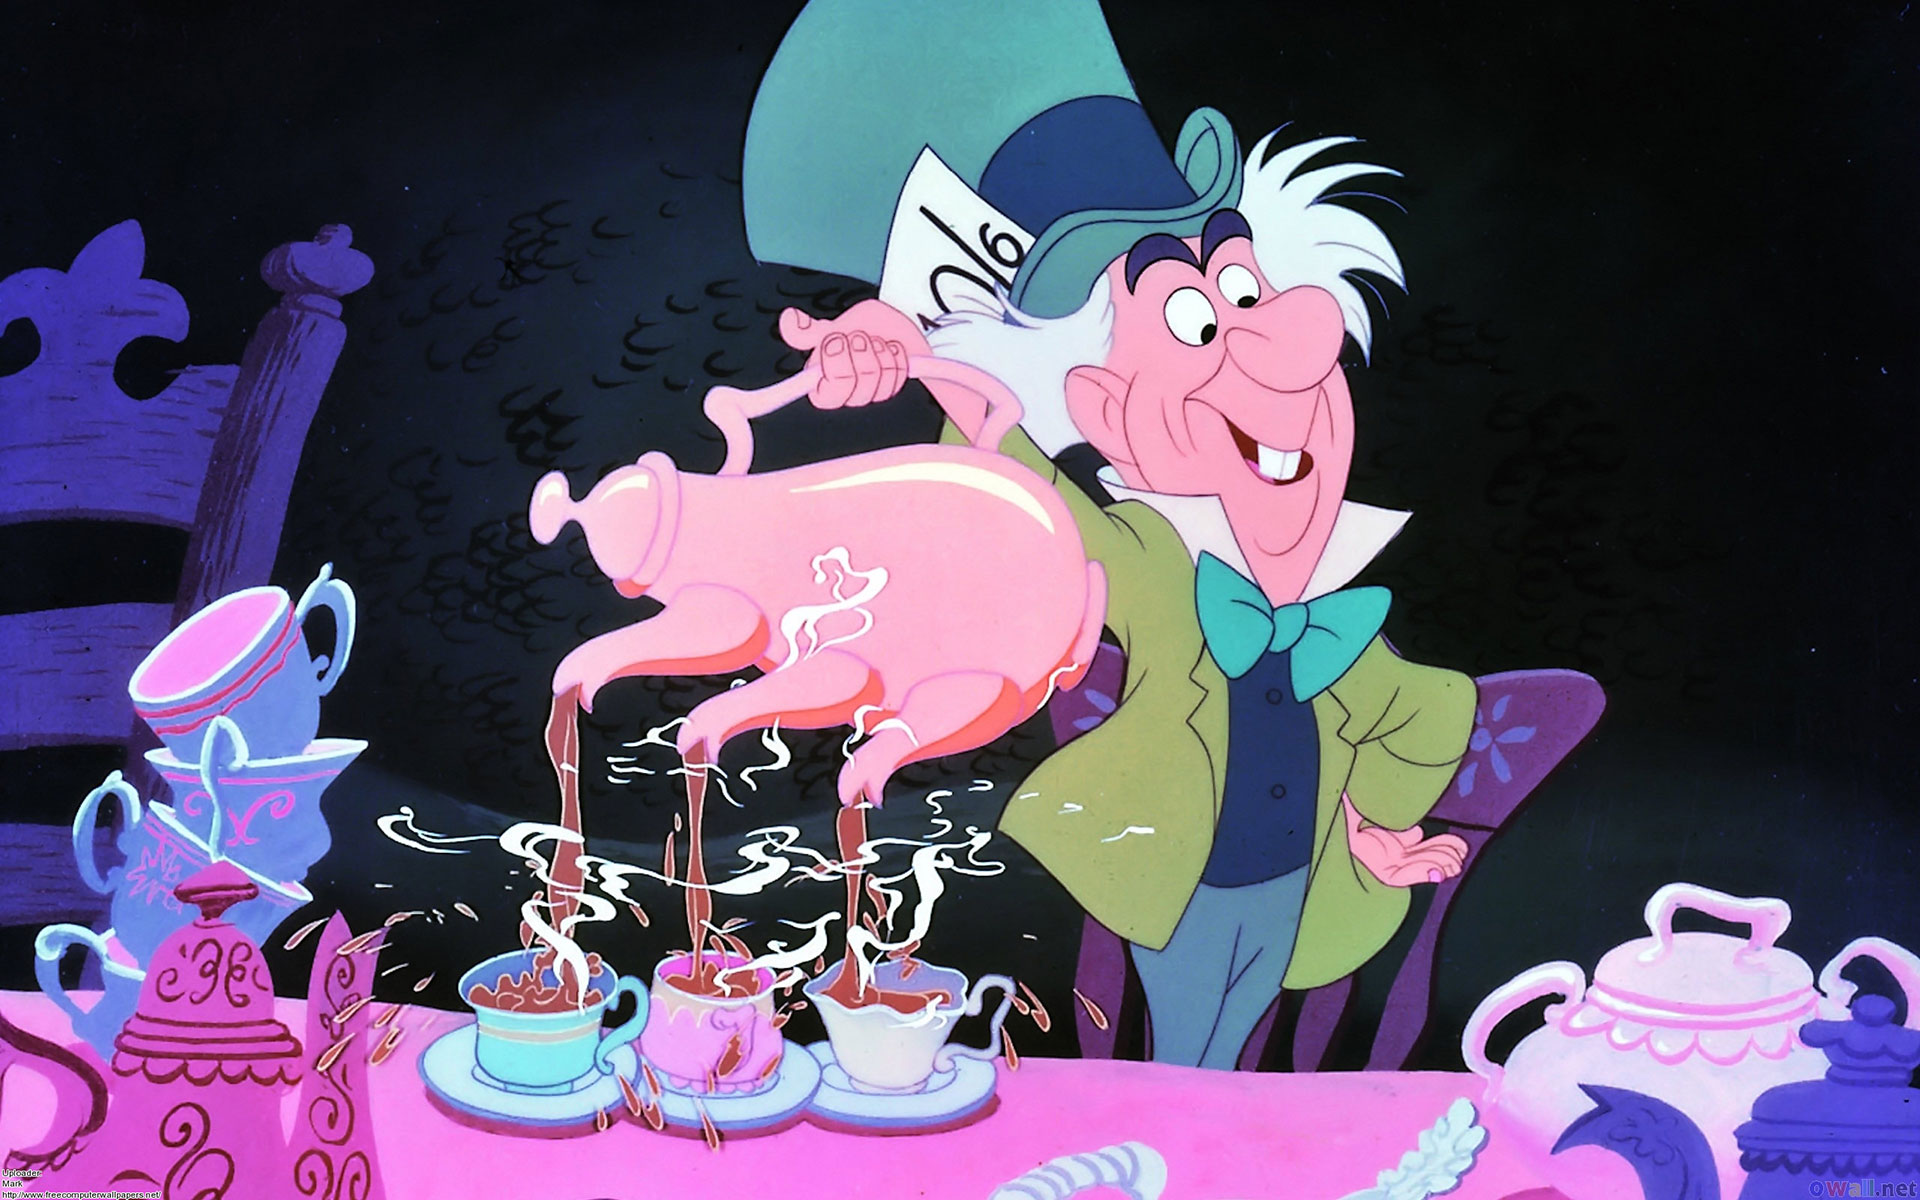 Original Alice In Wonderland Cartoon Porn - A Field Guide to the Curiouser and Curiouser Adapted Worlds of \